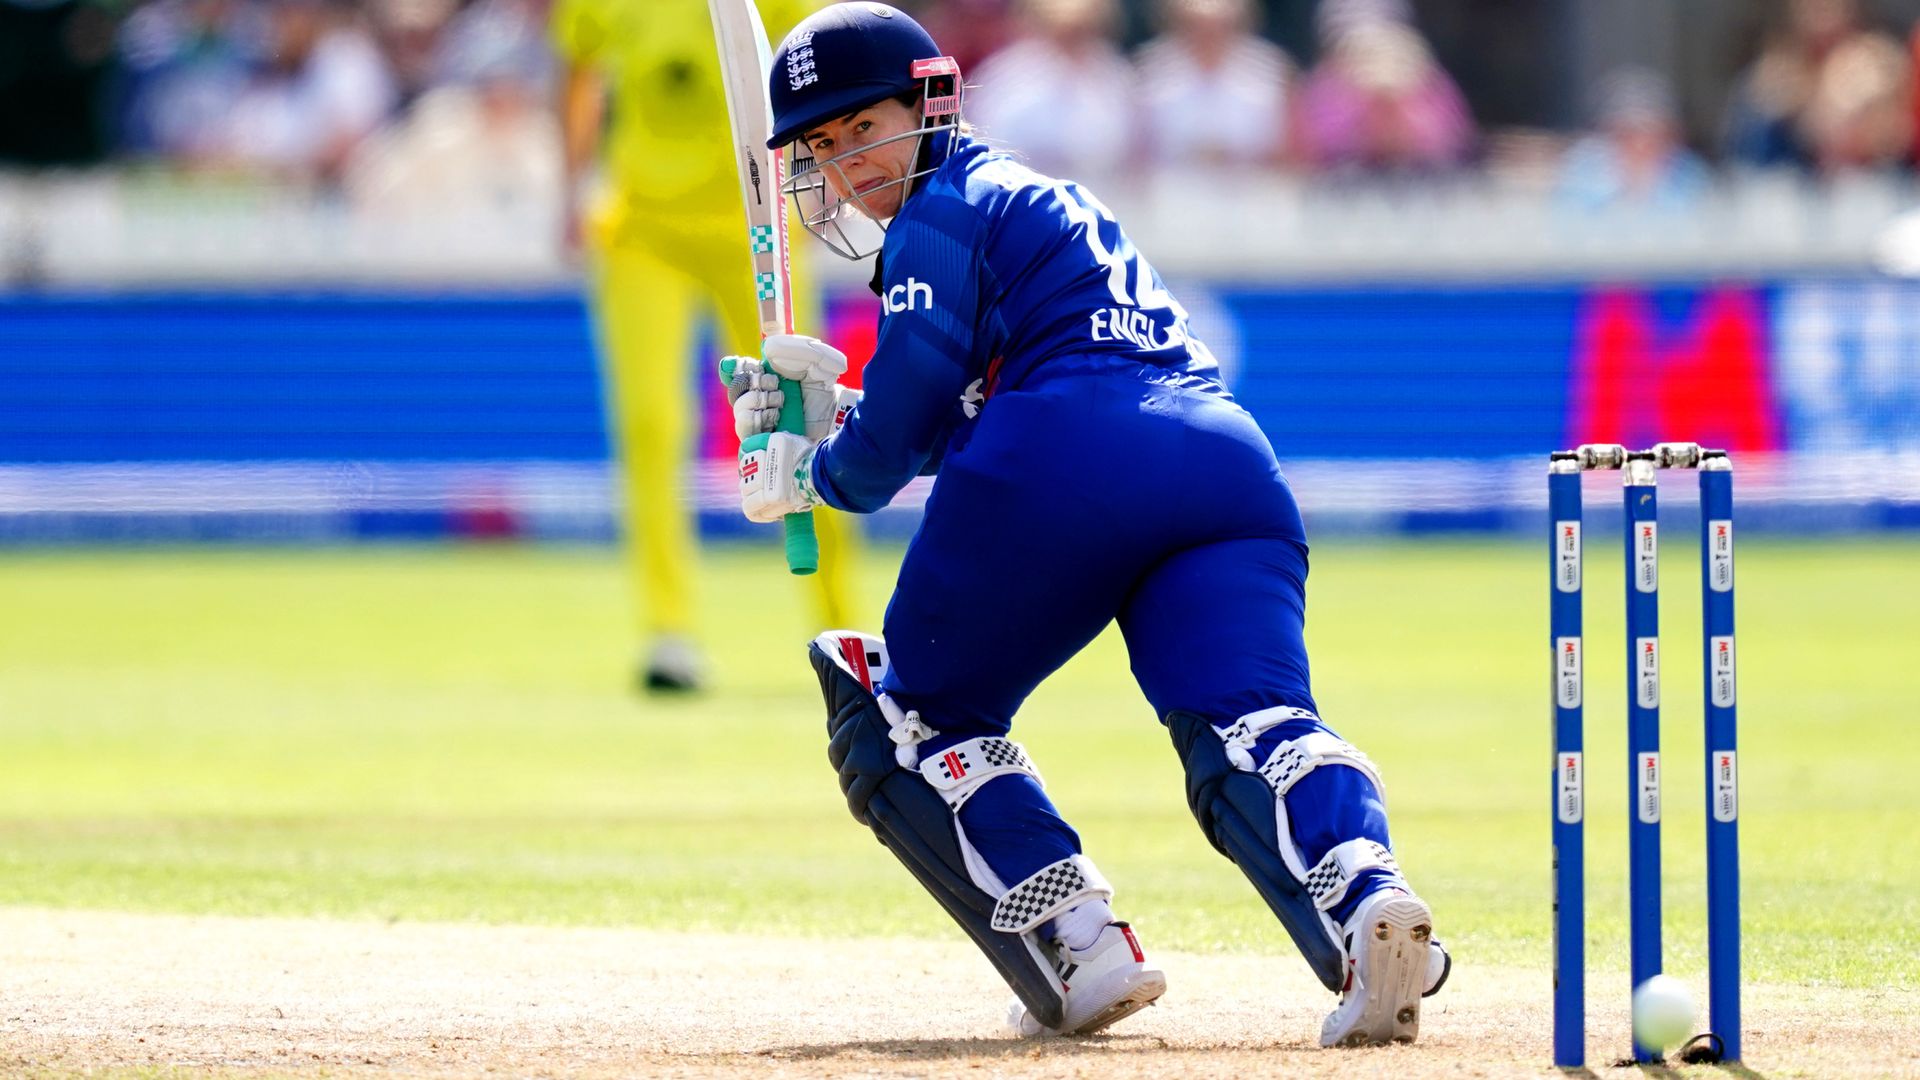 Beaumont and Capsey out after explosive stand as England chase 264 LIVE!